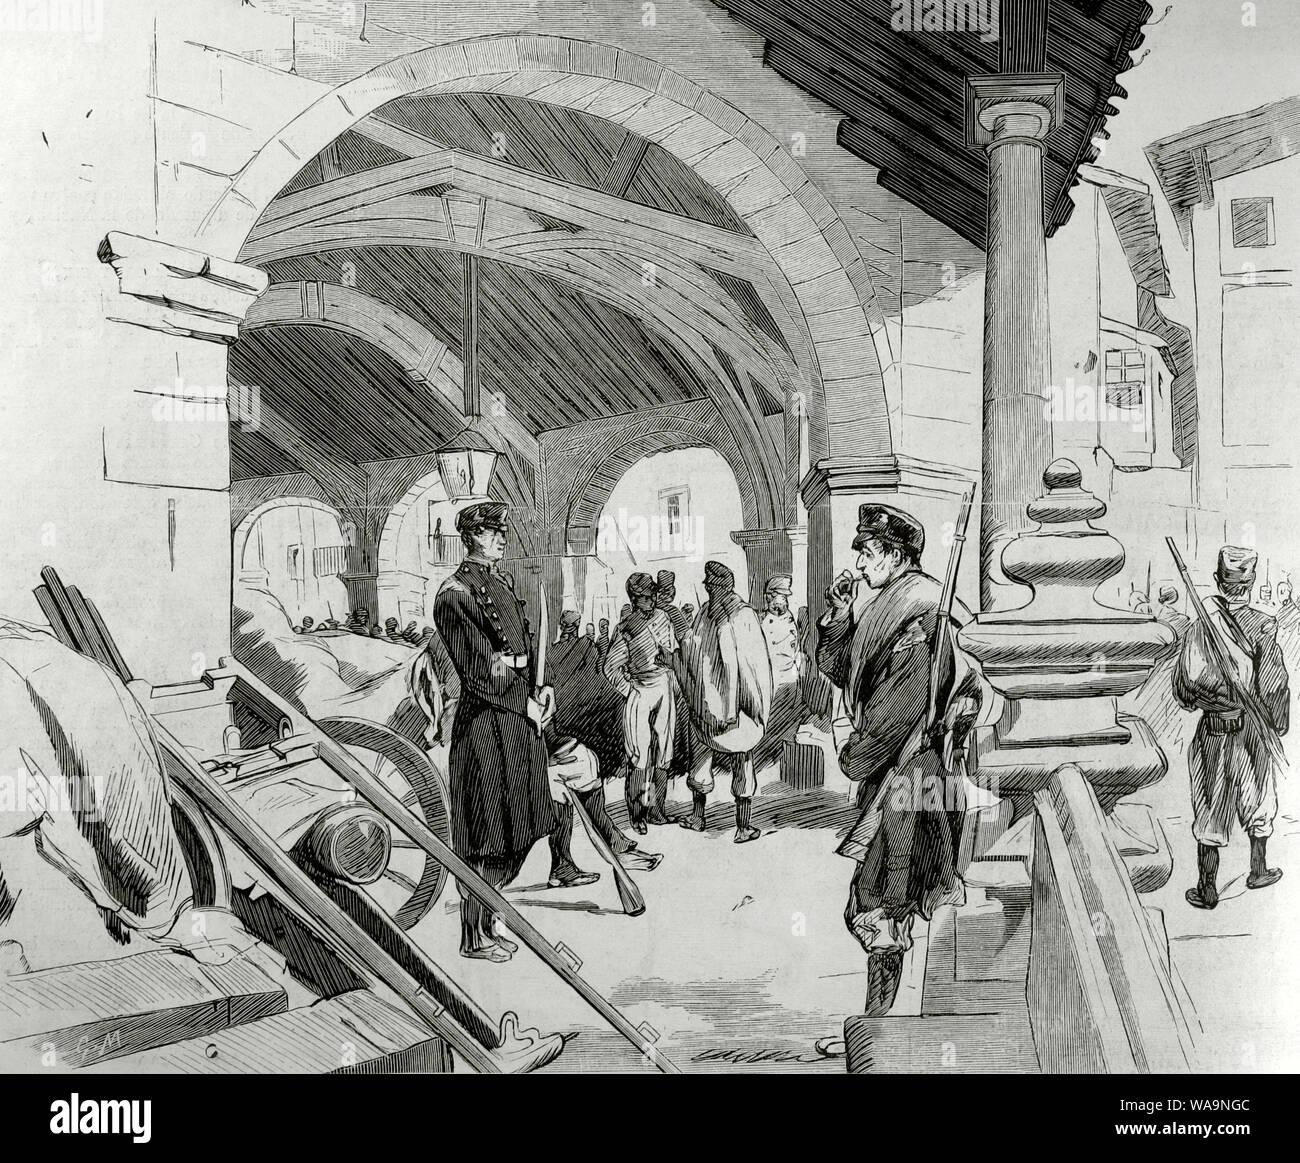 Third Carlist War (1872-1876). Final direct military confrontation between the Carlist movement and the government of Spain. Basque Country. Durango (Biscay province). Depot of artillery material on the porch of the church of Santa Maria. Engraving. La Ilustracion Española y Americana, March 8, 1876. Stock Photo